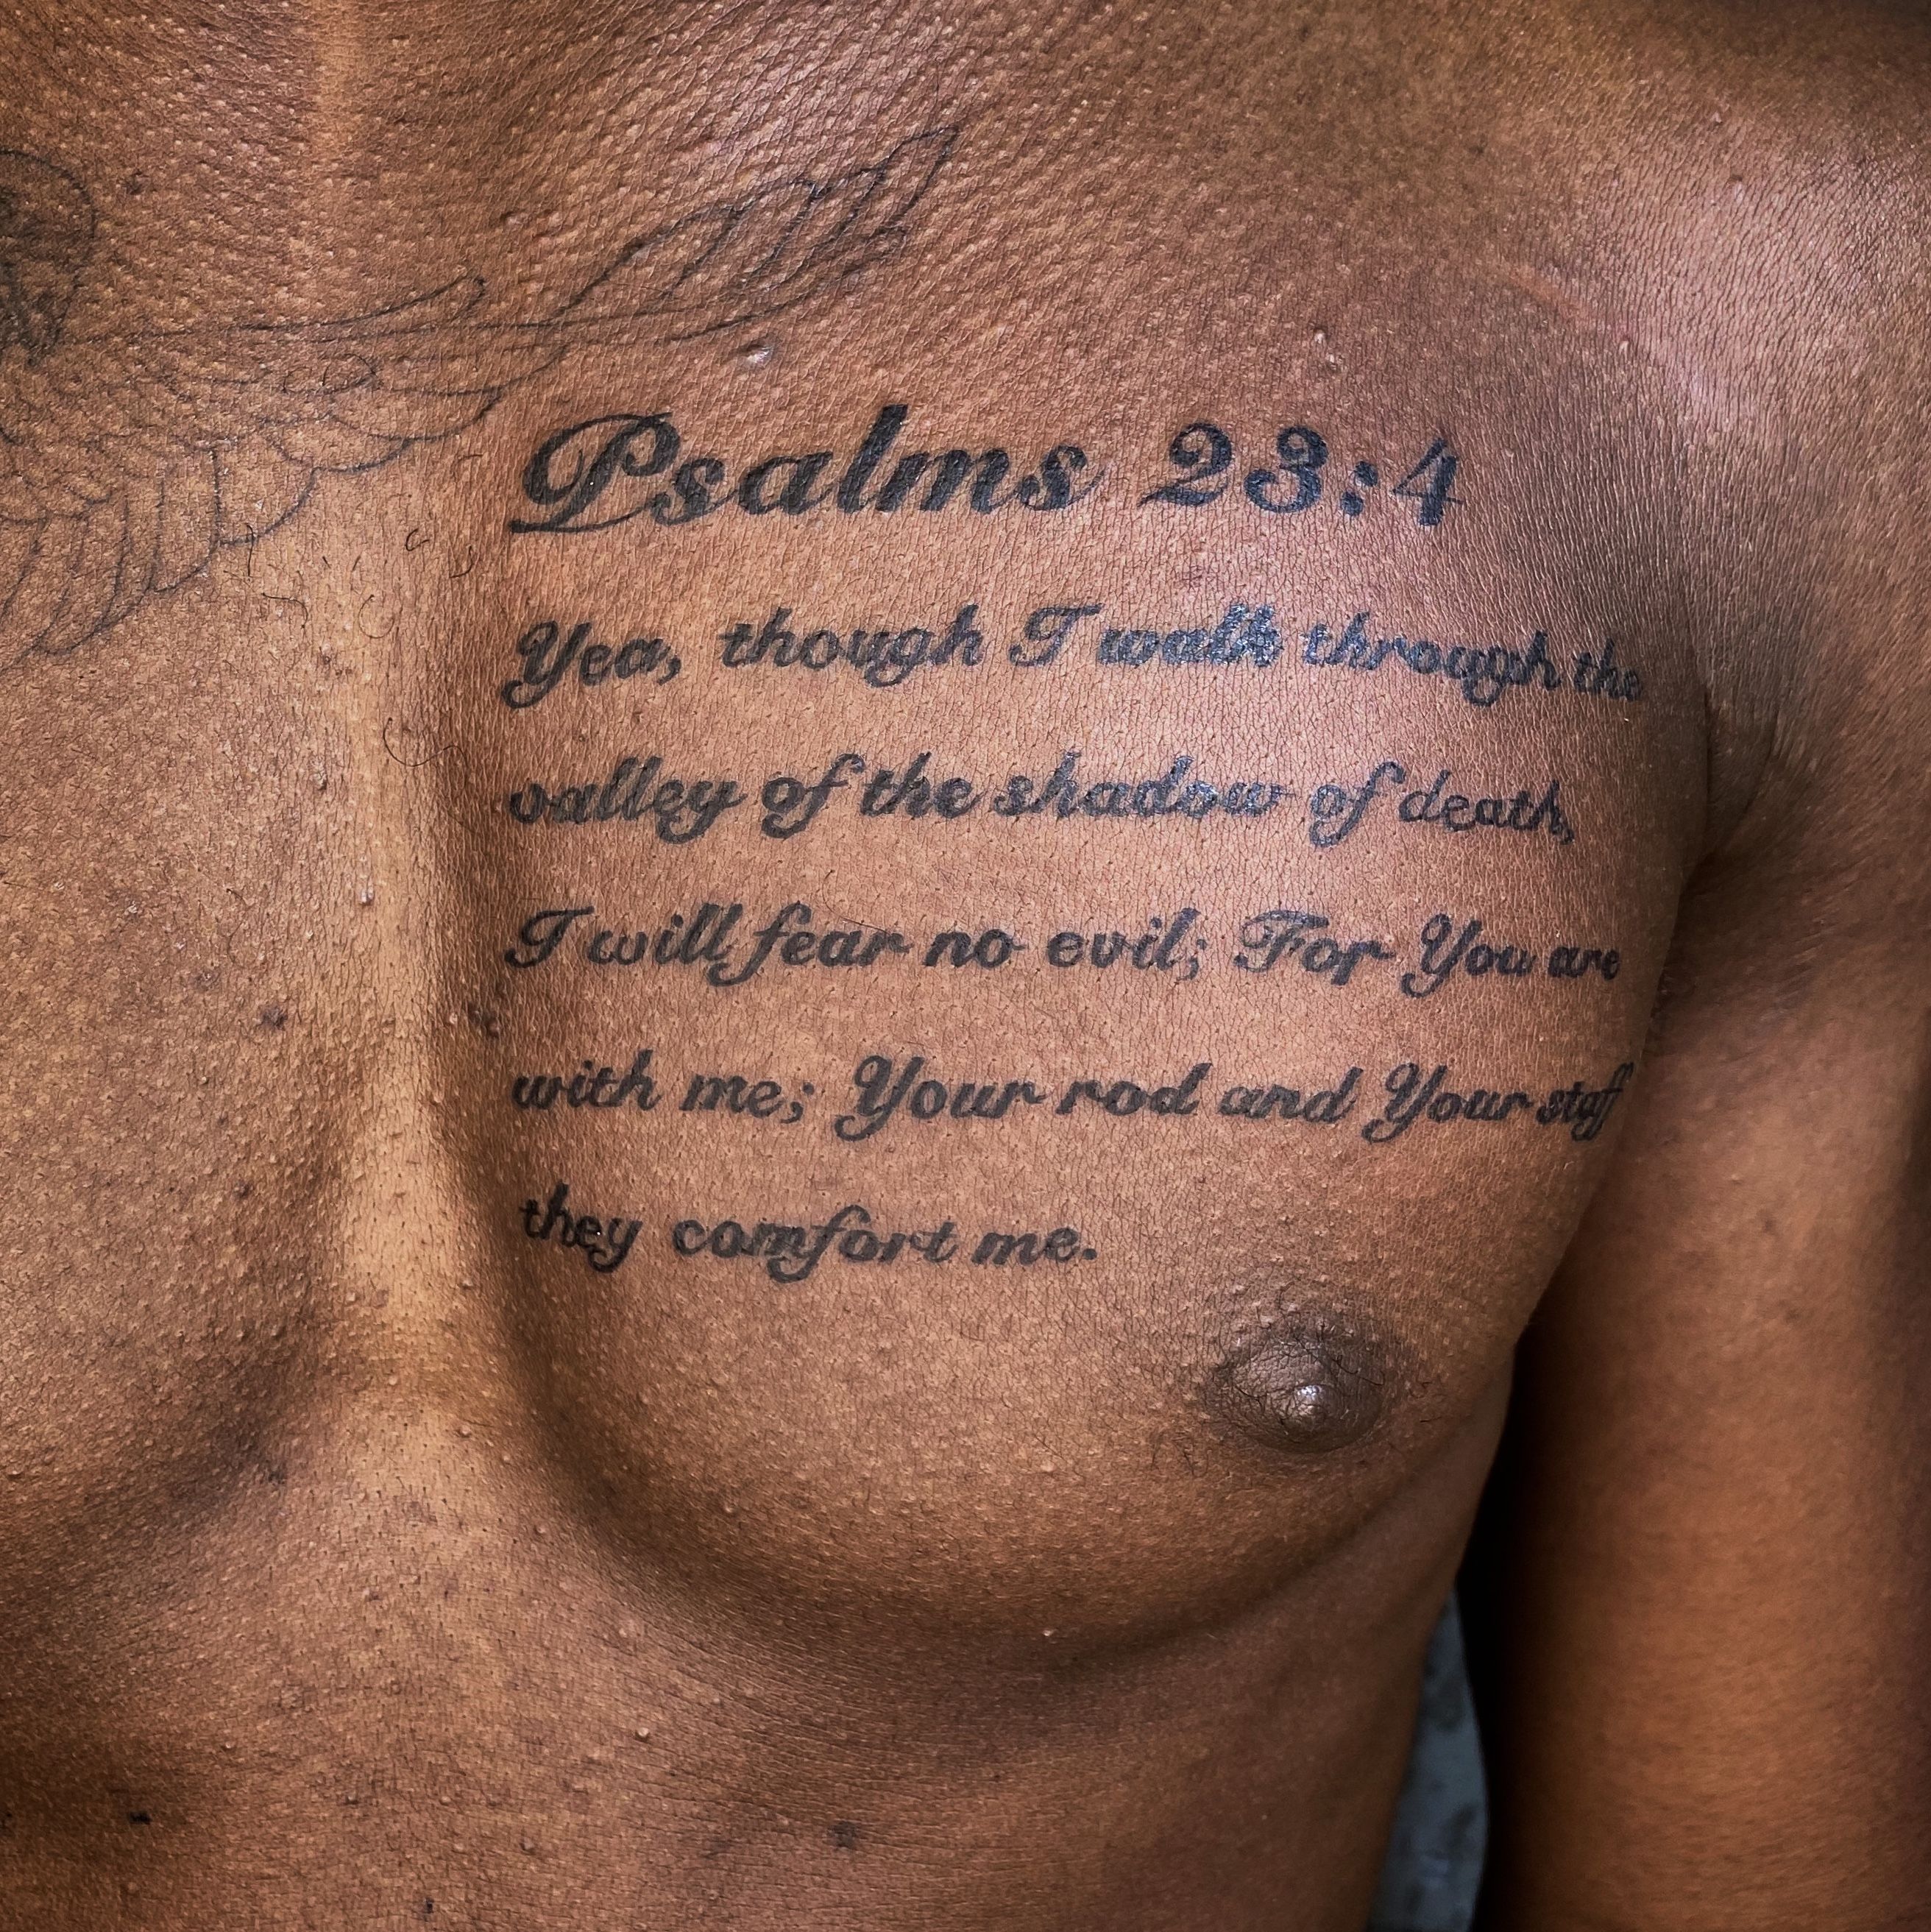 Tattoo uploaded by Khalil • Gates of heaven chest piece that says at the  top 